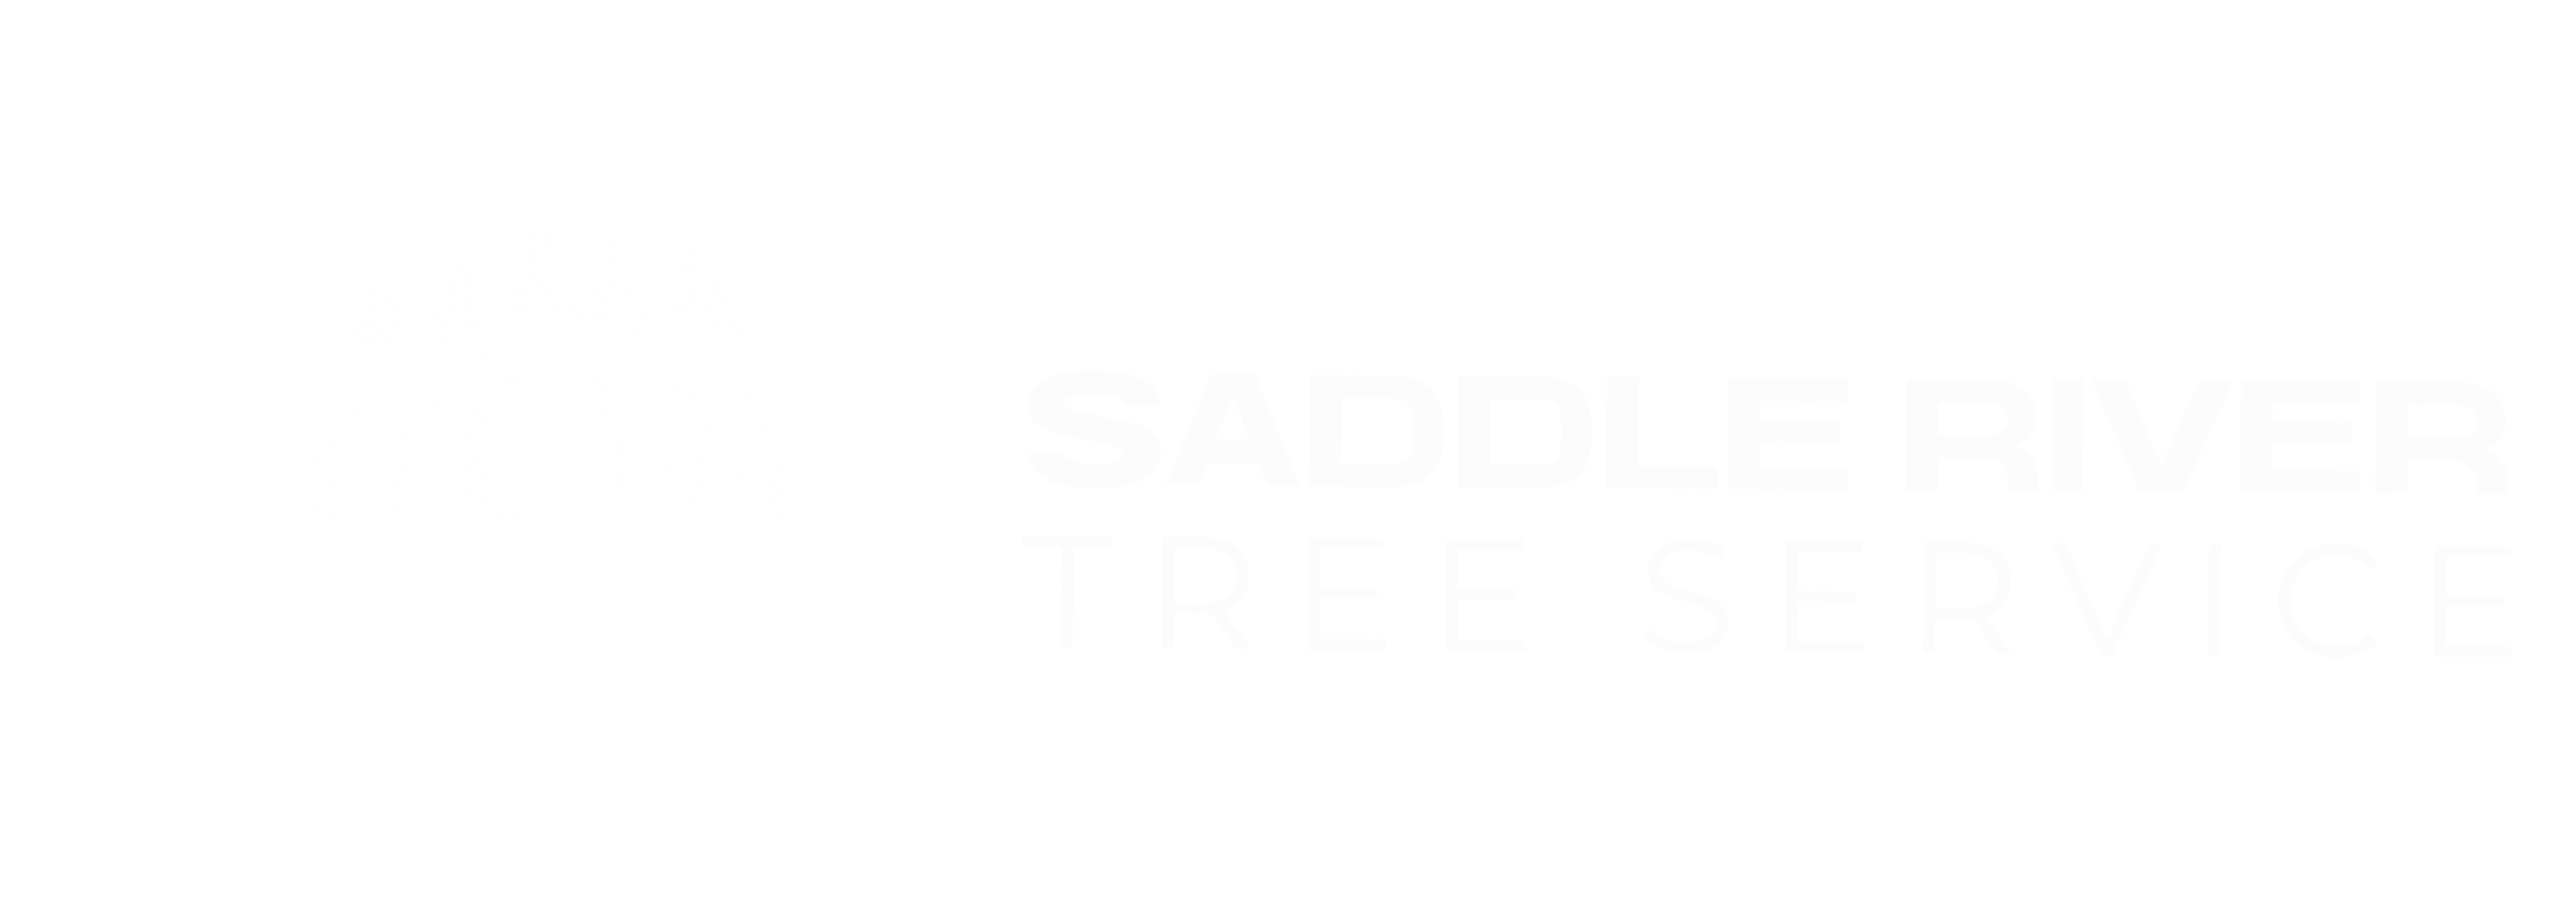 Saddle River Tree Services png